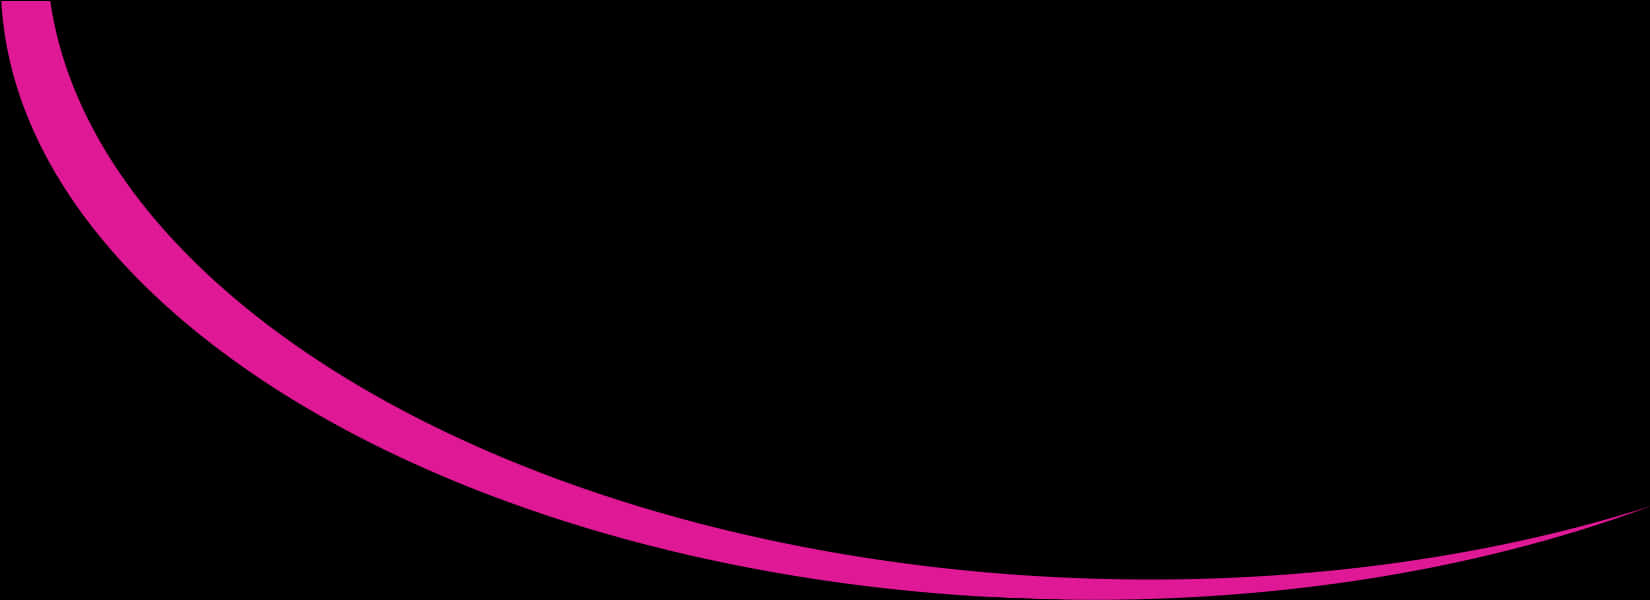 Pink Curved Lineon Black Background PNG